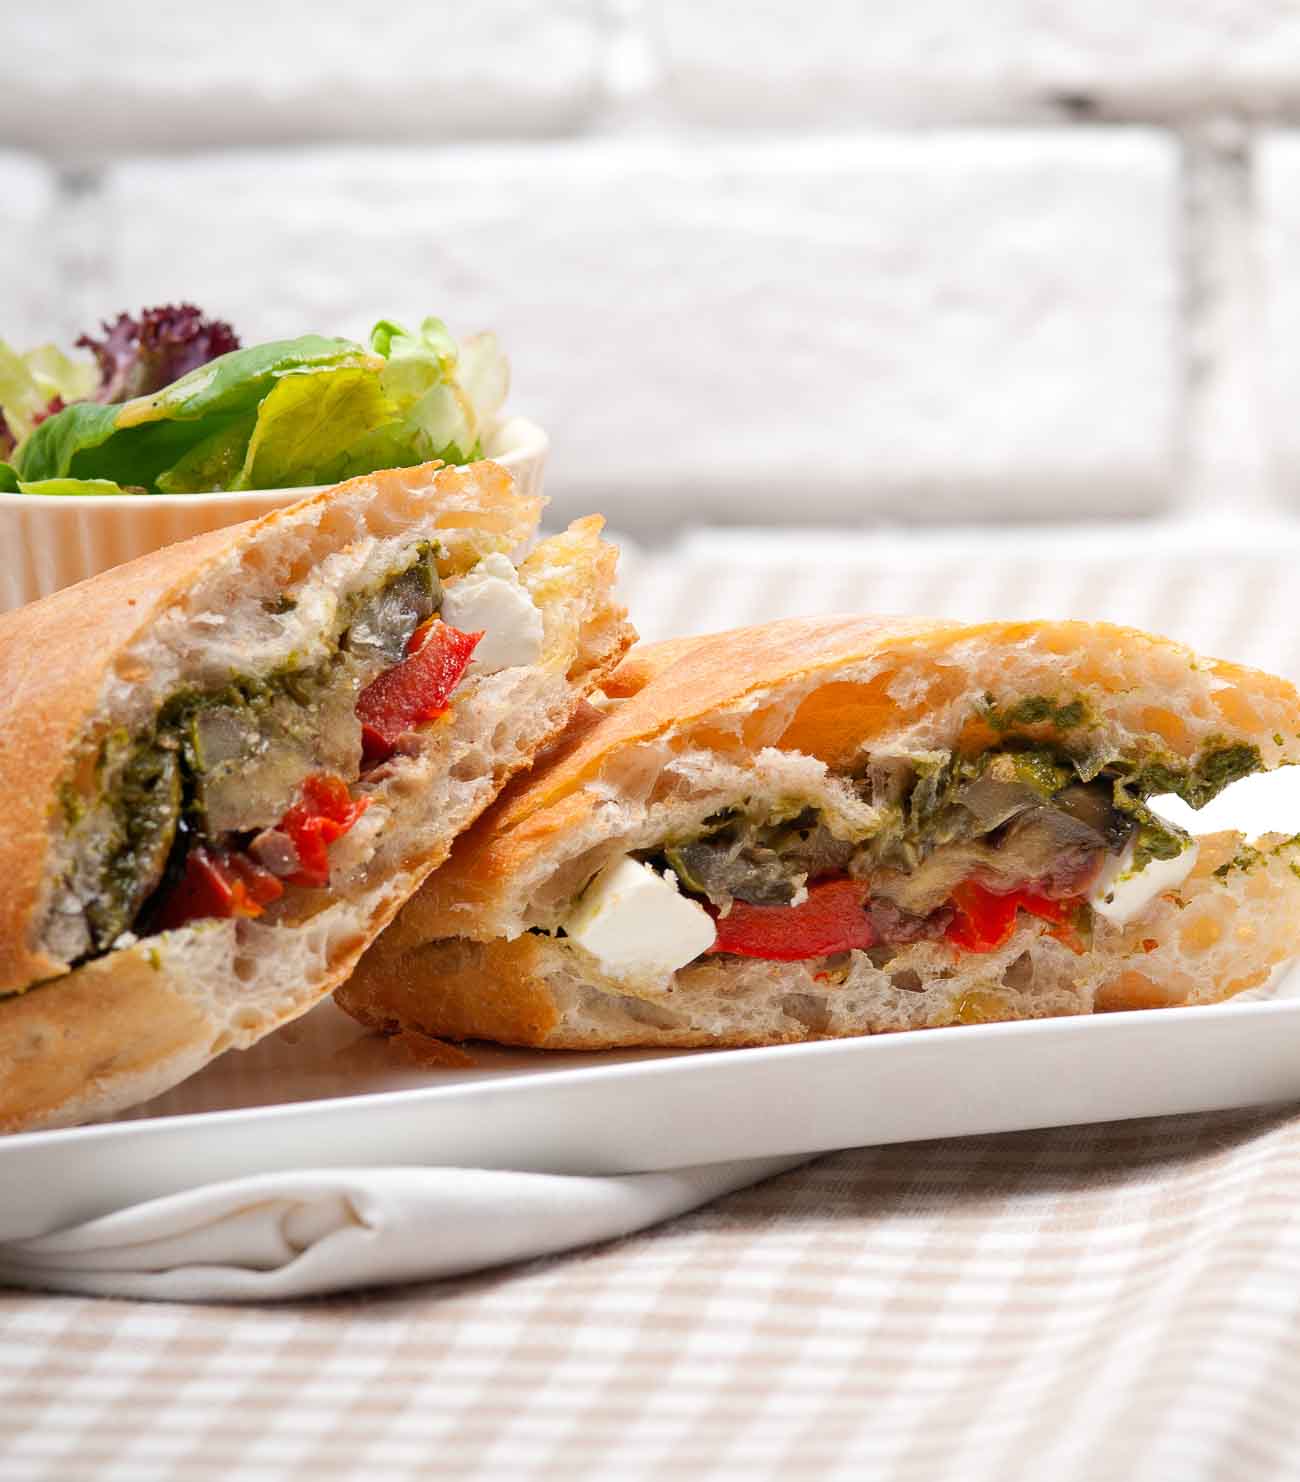 Roasted Vegetable Panini Sandwich With Feta Cheese Recipe